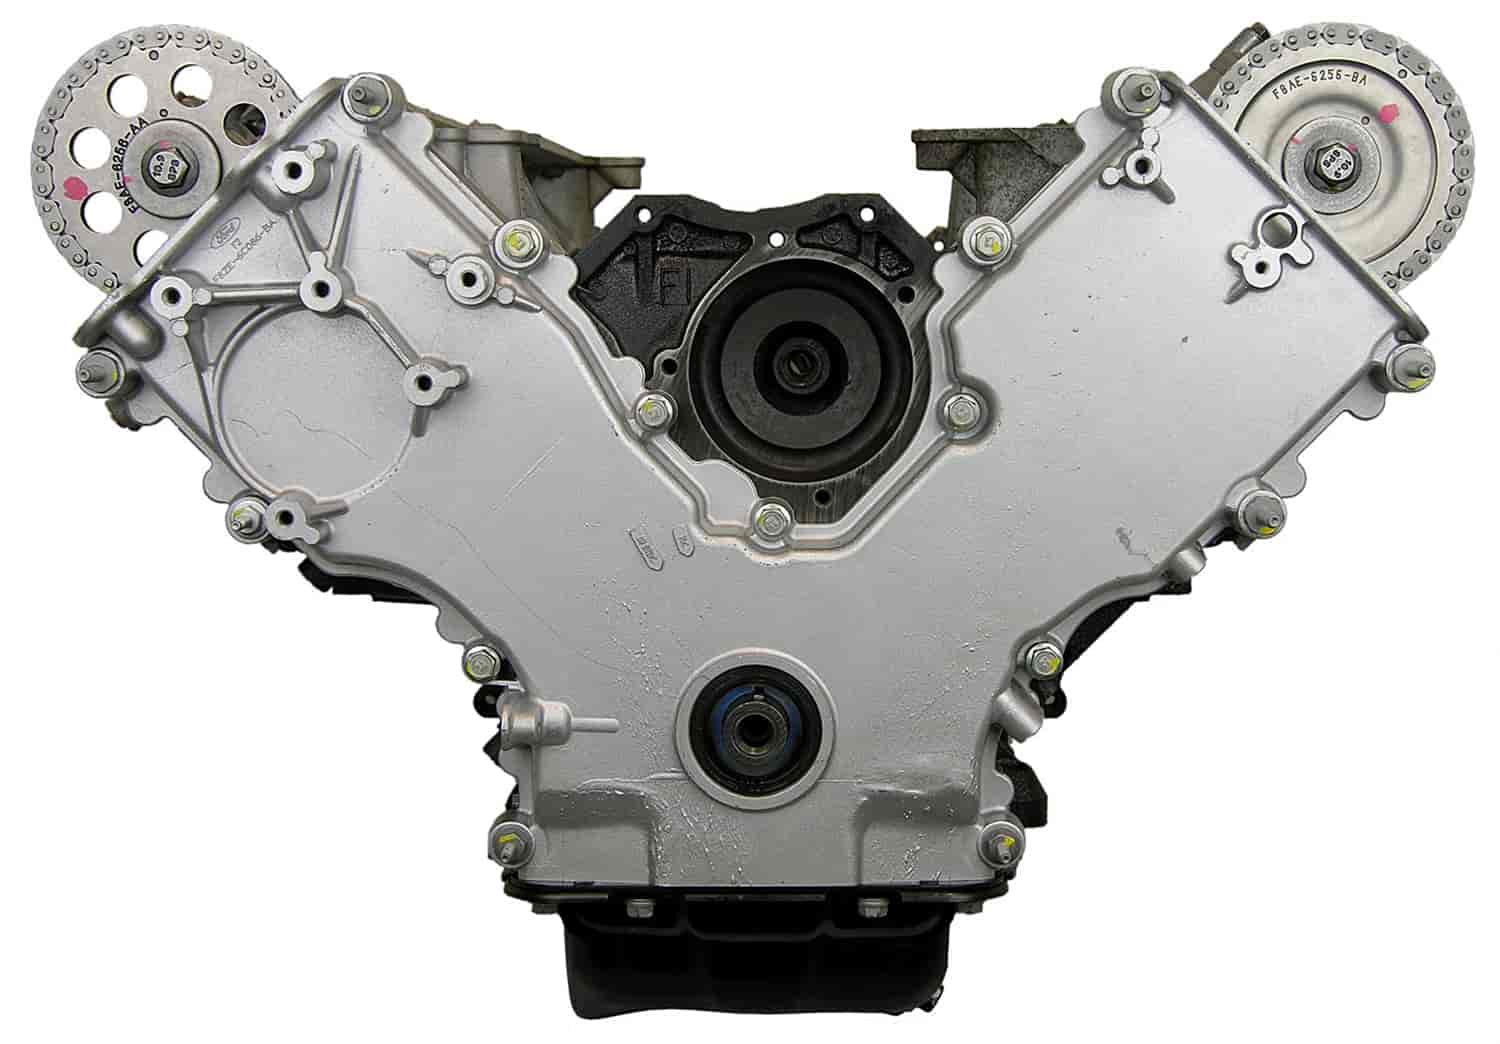 Remanufactured Crate Engine for 1996-1997 Ford Thunderbird & Mercury Cougar with 4.6L V8